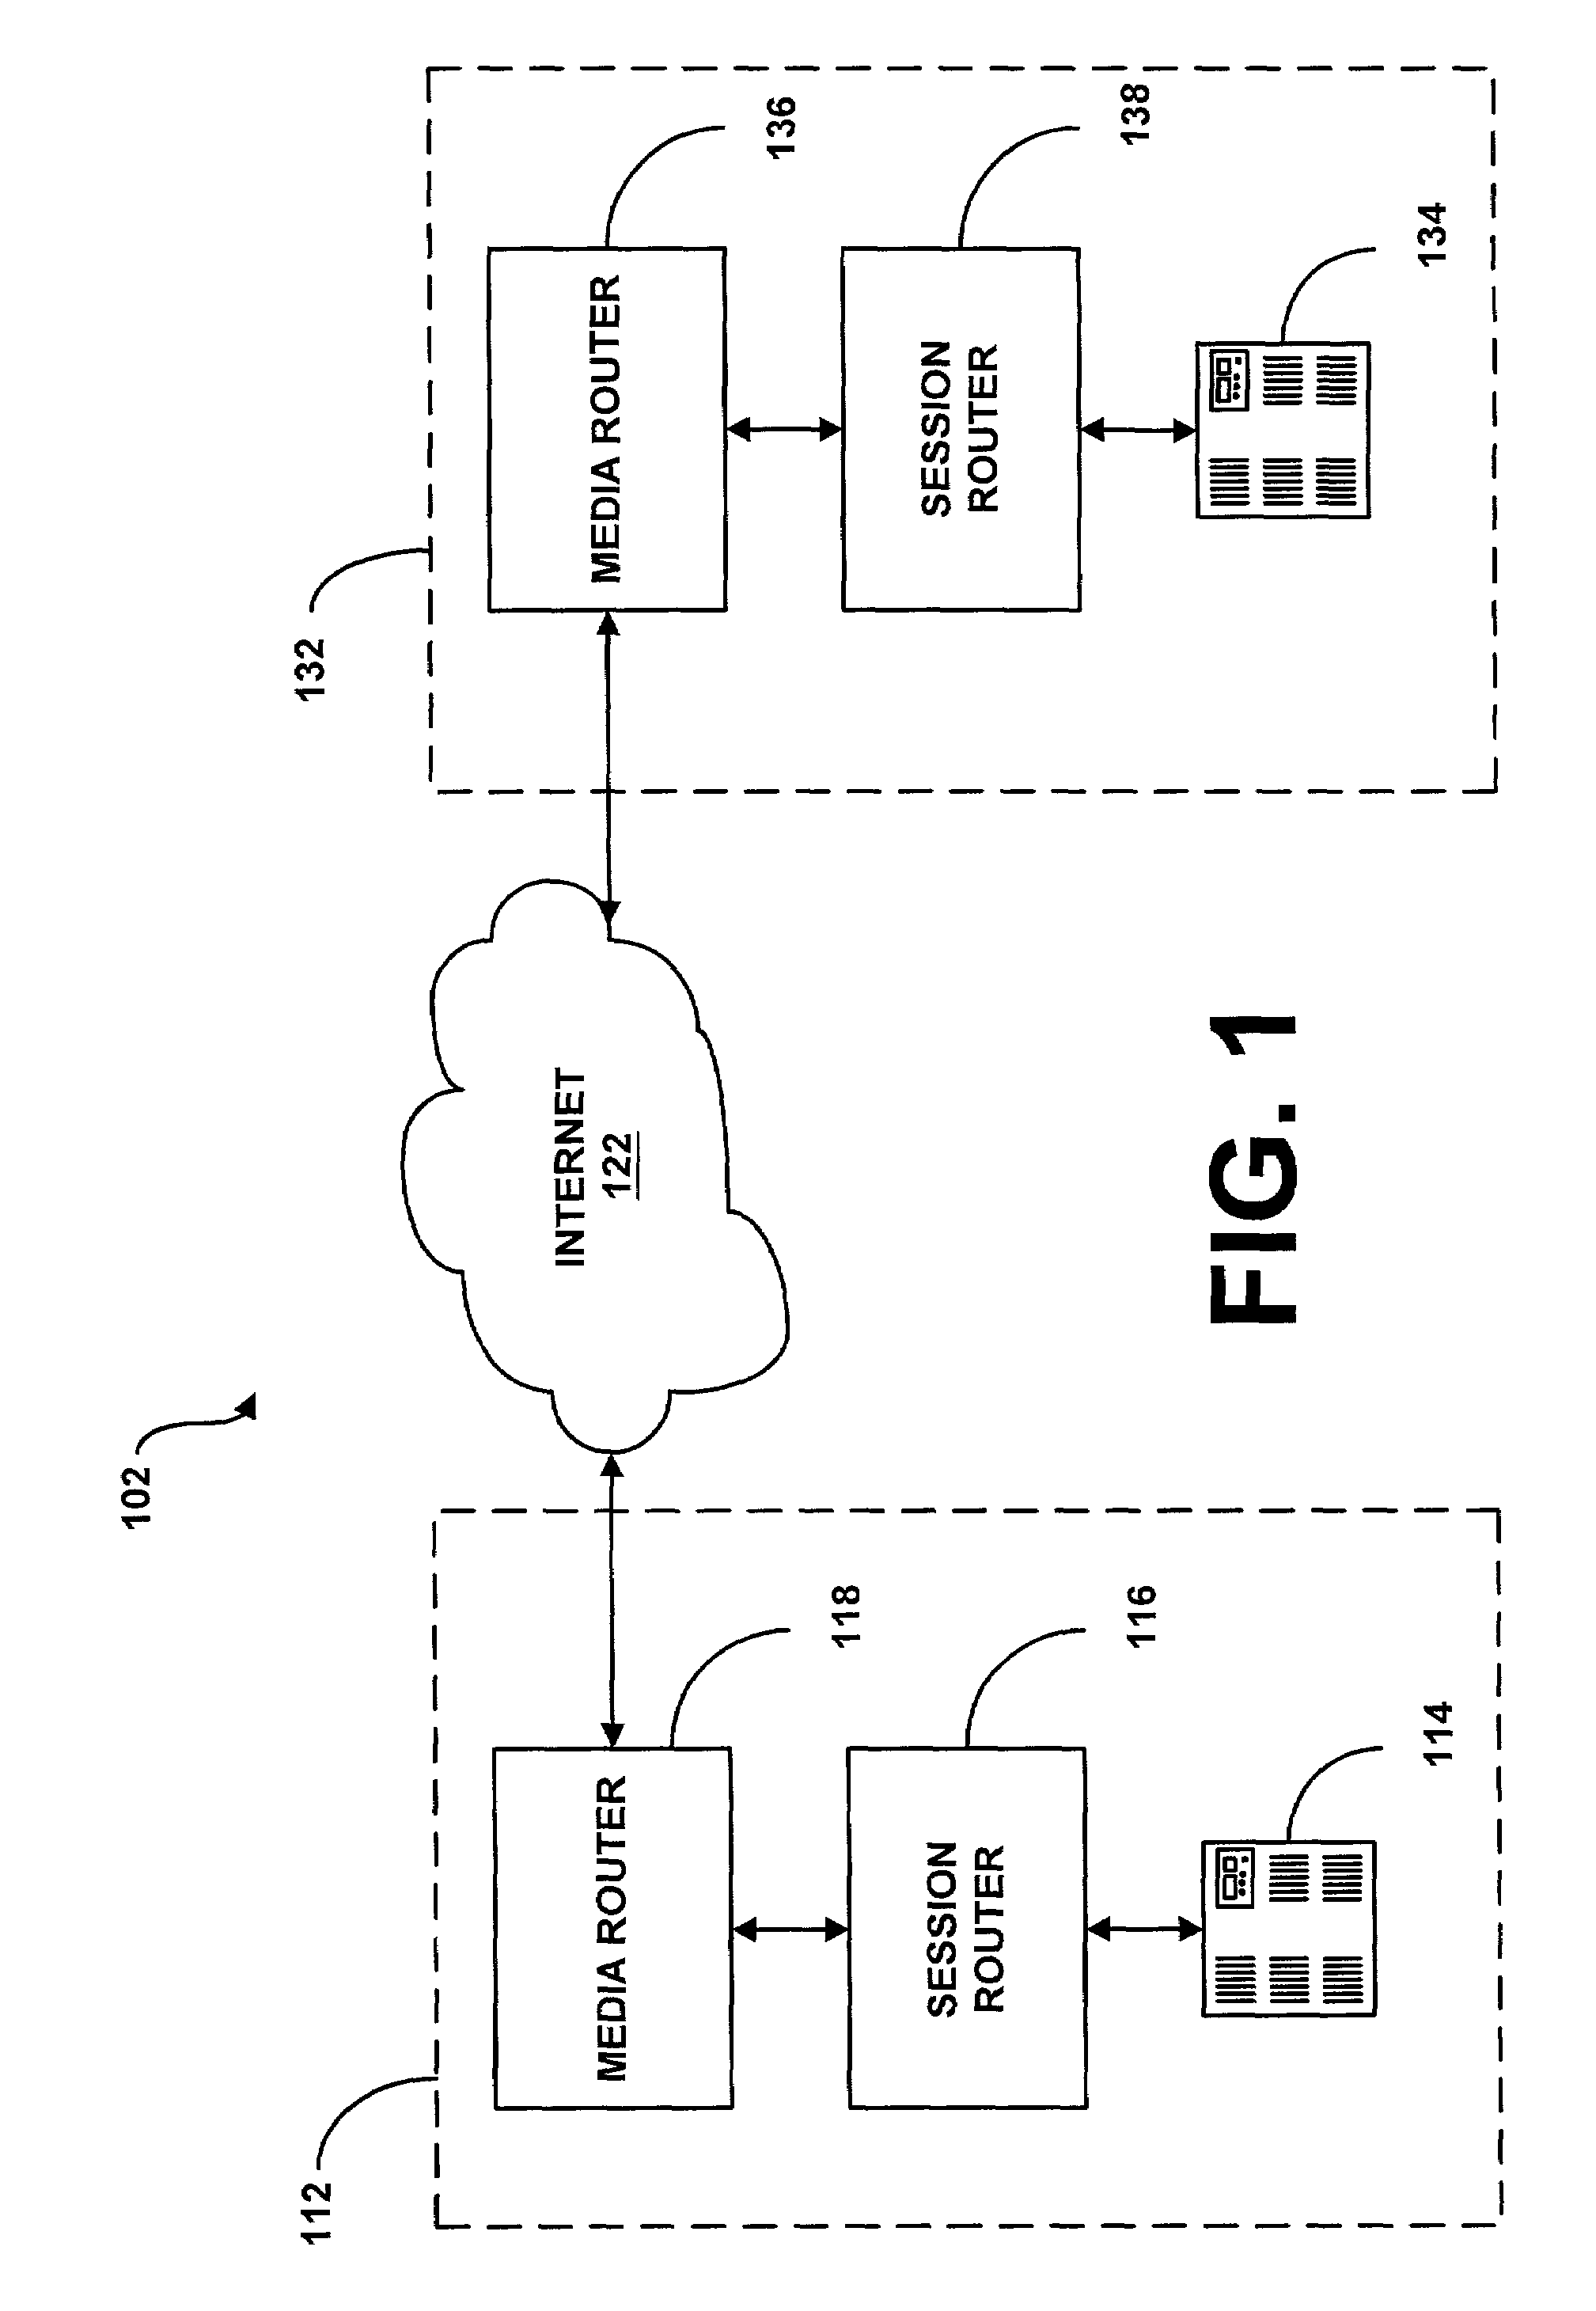 System and method for determining flow quality statistics for real-time transport protocol data flows